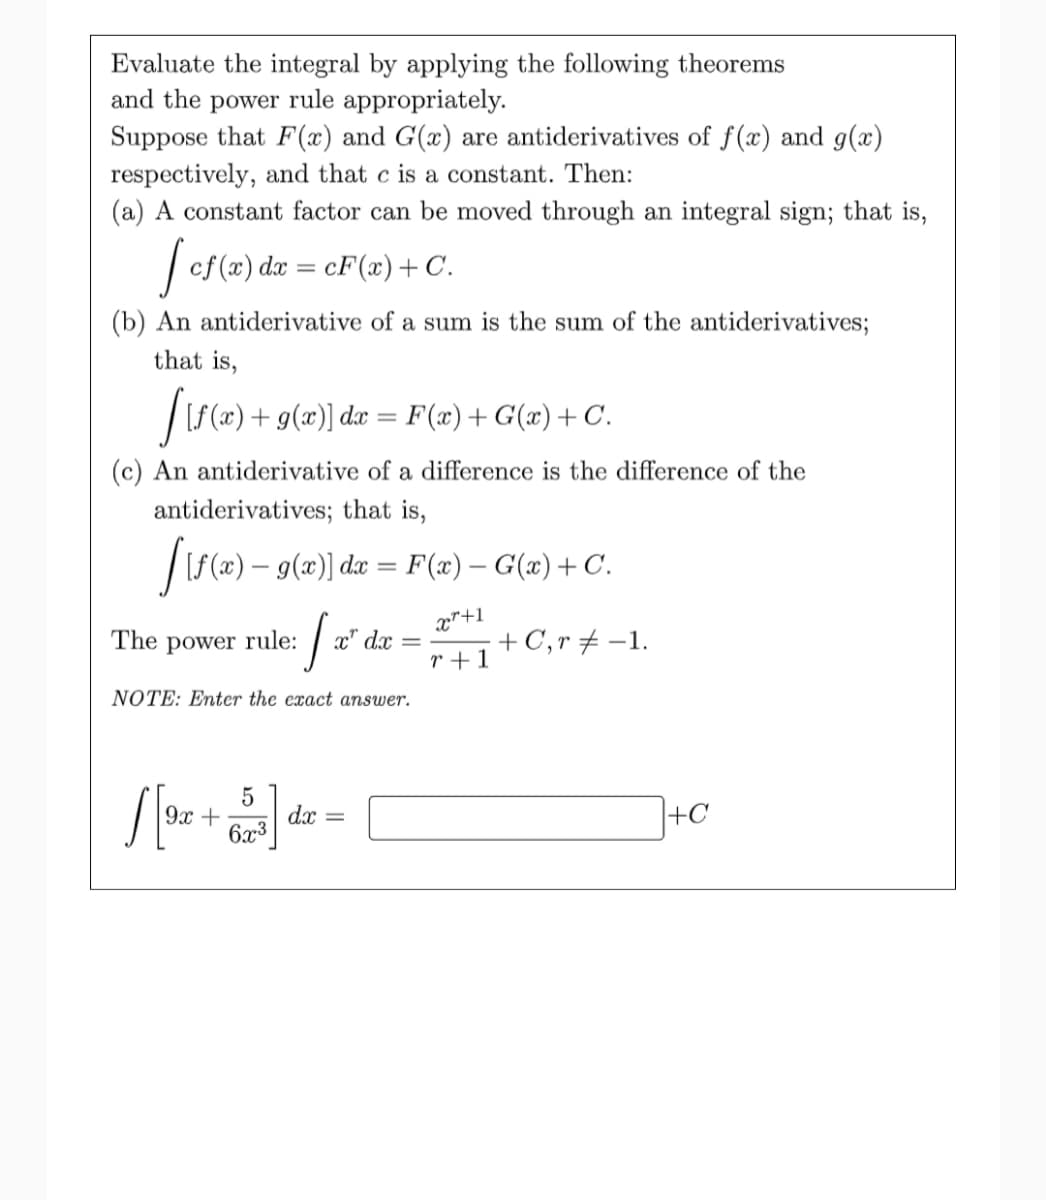 Evaluate the integral by applying the following theorems
and the power rule appropriately.
Suppose that F(x) and G(x) are antiderivatives of f(x) and g(x)
respectively, and that c is a constant. Then:
(a) A constant factor can be moved through an integral sign; that is,
| cf (x) dæ = cF(x)+C.
(b) An antiderivative of a sum is the sum of the antiderivatives;
that is,
|[f (x) + g(x)] dx = F(x)+ G(x)+ C.
(c) An antiderivative of a difference is the difference of the
antiderivatives; that is,
|IS(x) – 9(x)] dx = F(æ) – G(x)+C.
The power rule: / x"d
x"+1
.x
r +1
+ C,r + -1.
NOTE: Enter the exact answer.
9x +
dx
+C
6x3
